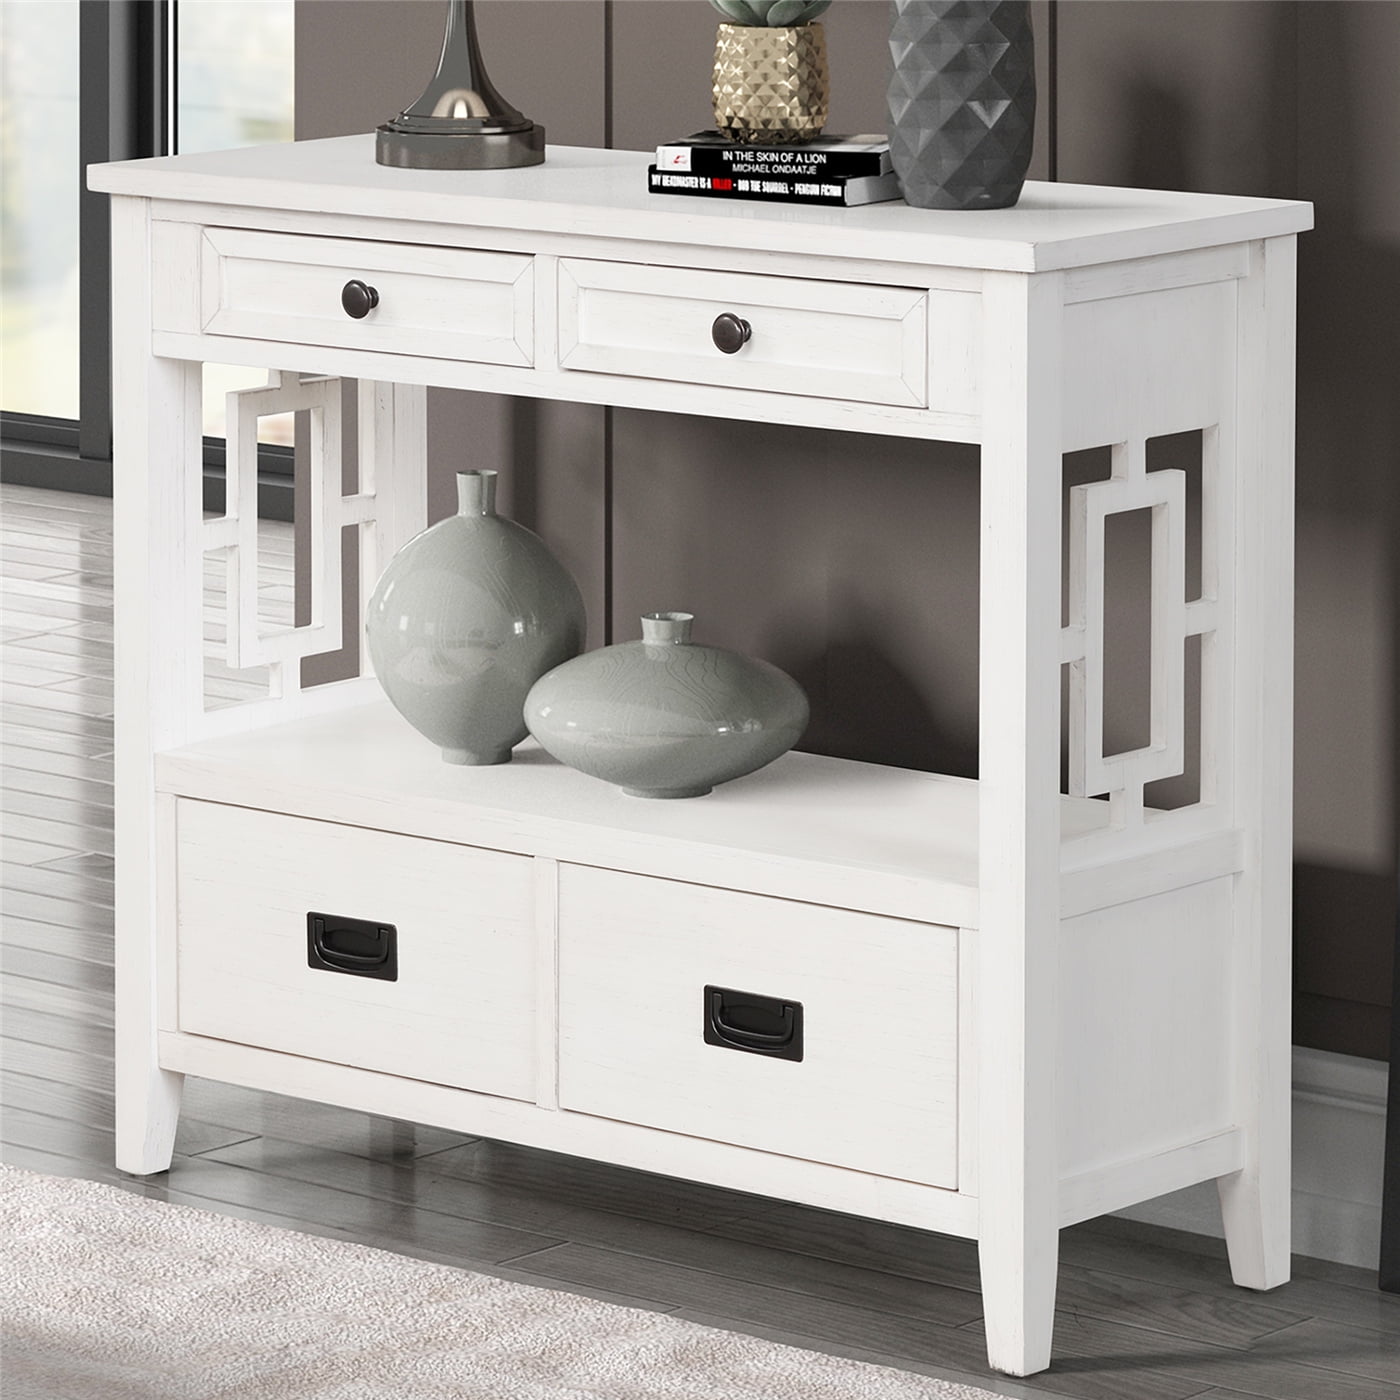 ANBAZAR White Storage Cabinet Console Table with 2-Drawers and 4